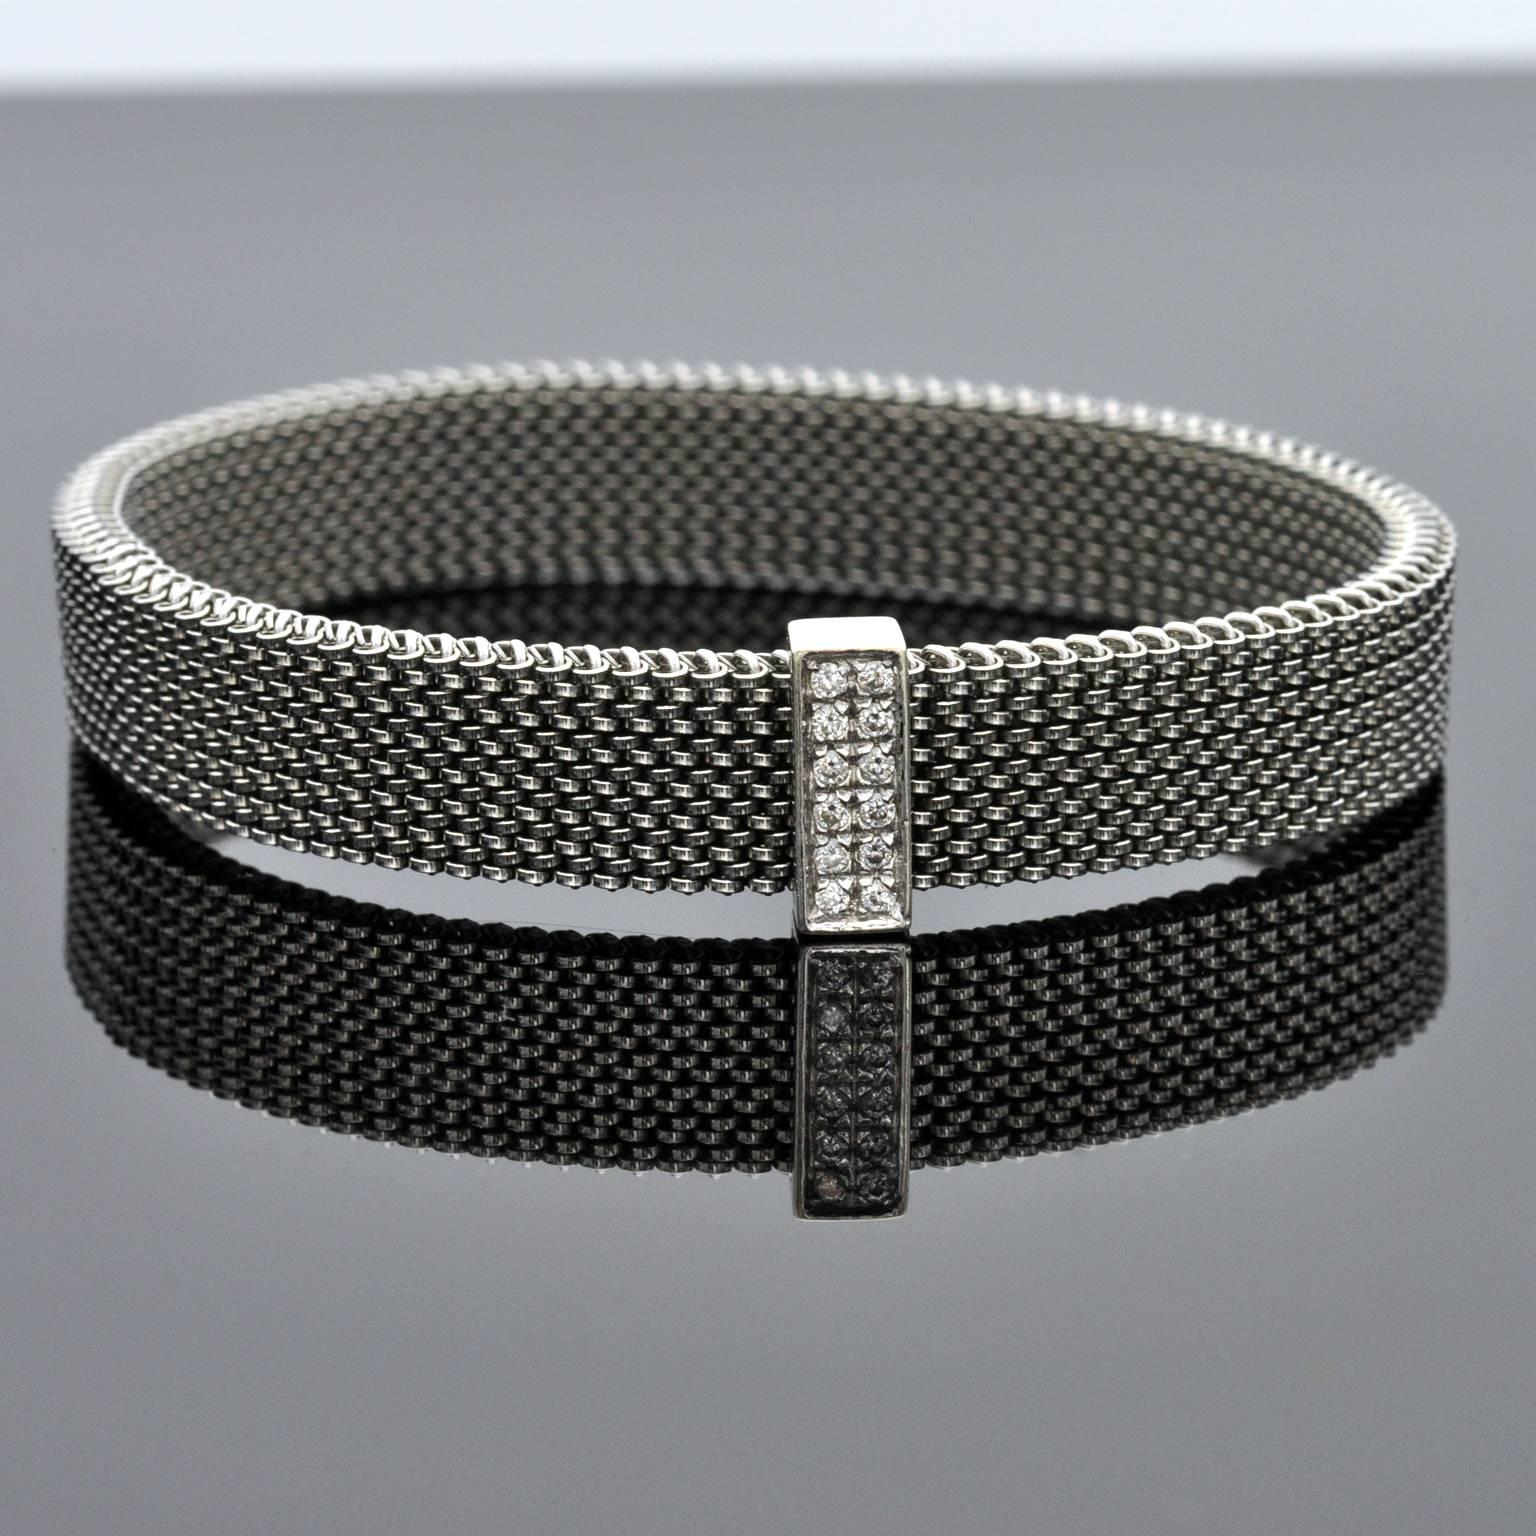  Stylish and elegant bracelet , White diamonds on 18 Kt white-gold on a  stainless steel spring band. 
Fits all sizes.